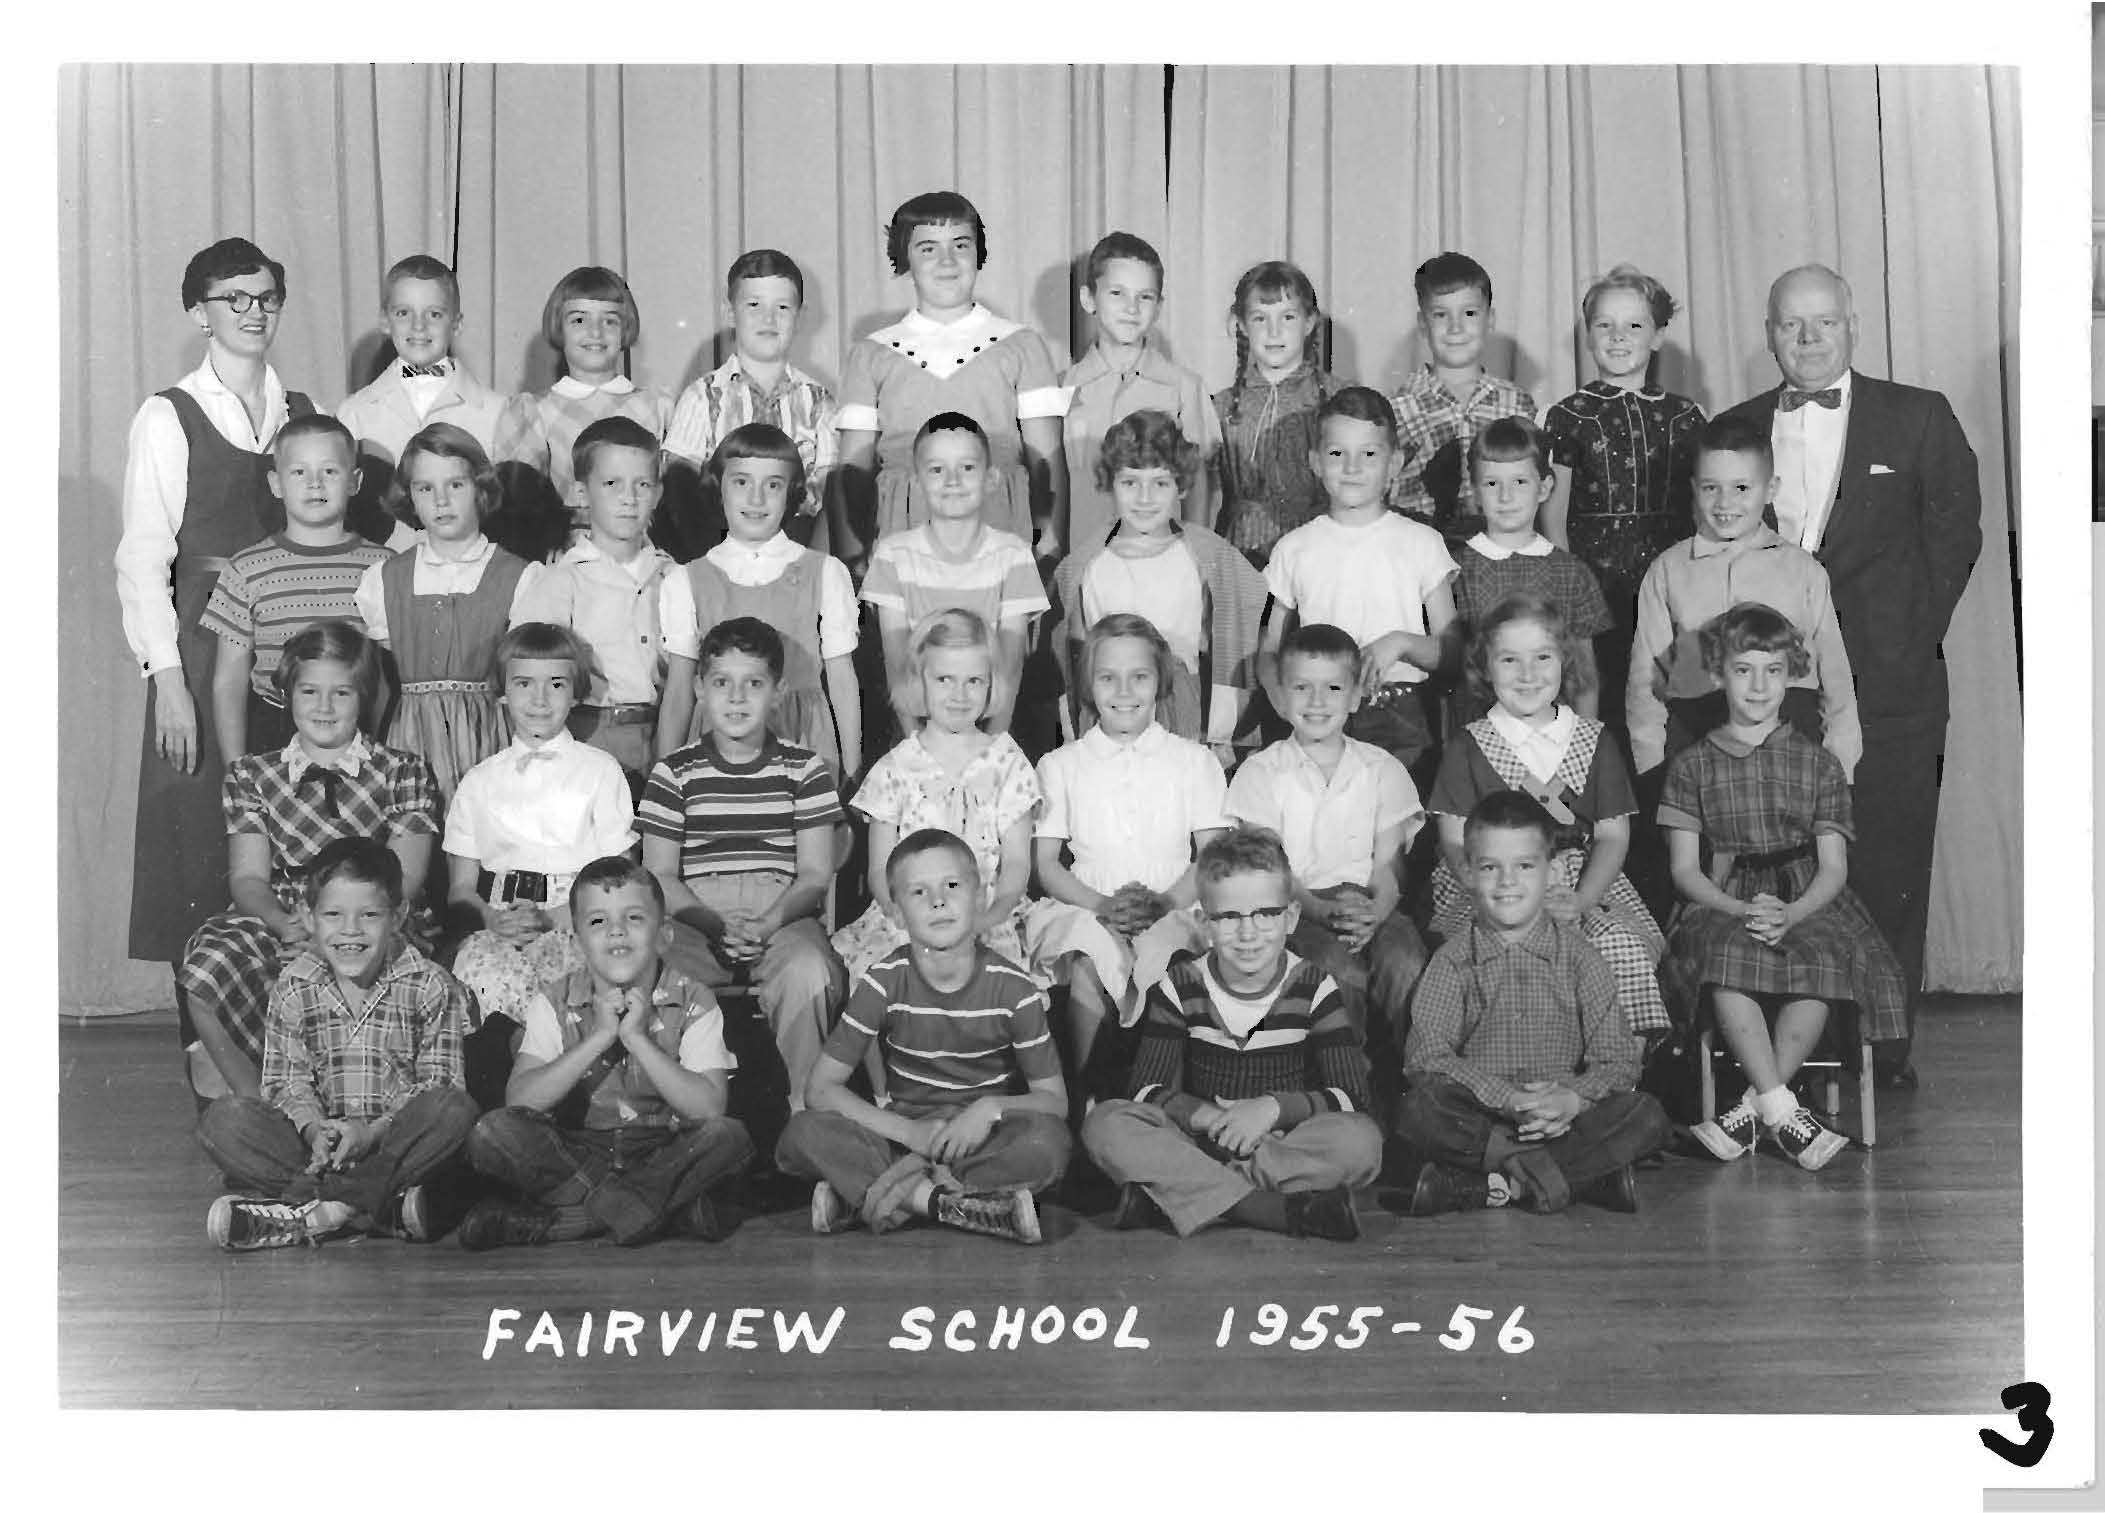 Fairview Elementary School class photo of 3rd grade 1955-56, submitted by Dan Wolfe FHS Class of '65